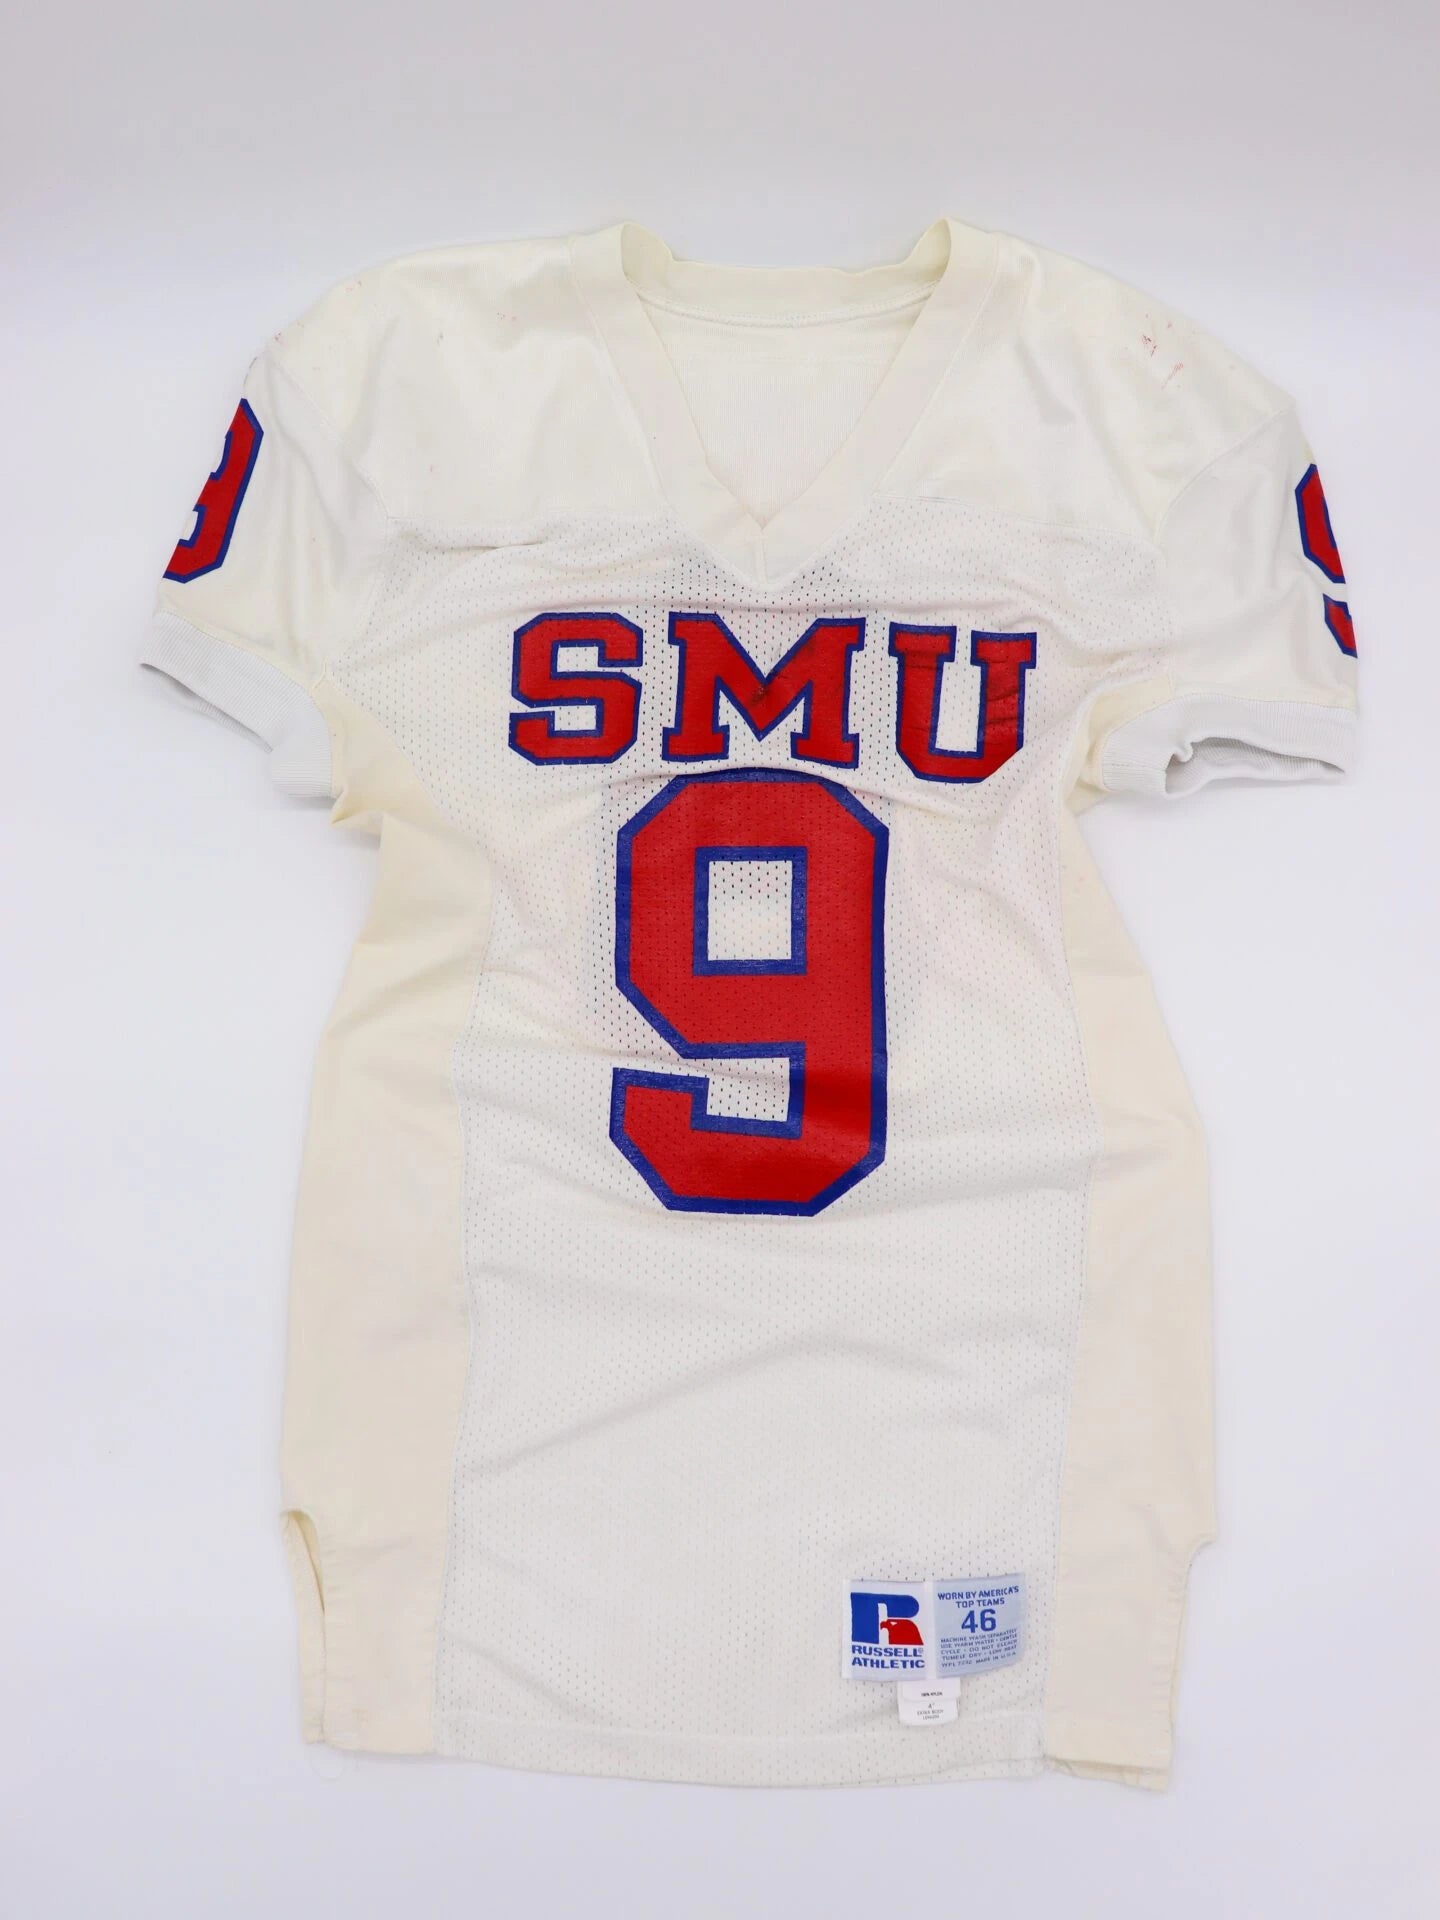 to Die for Collectibles Game Worn 1990’s #9 D. Hall White SMU Mustangs Football White Road Football Jersey, Russell Athletic Size 46